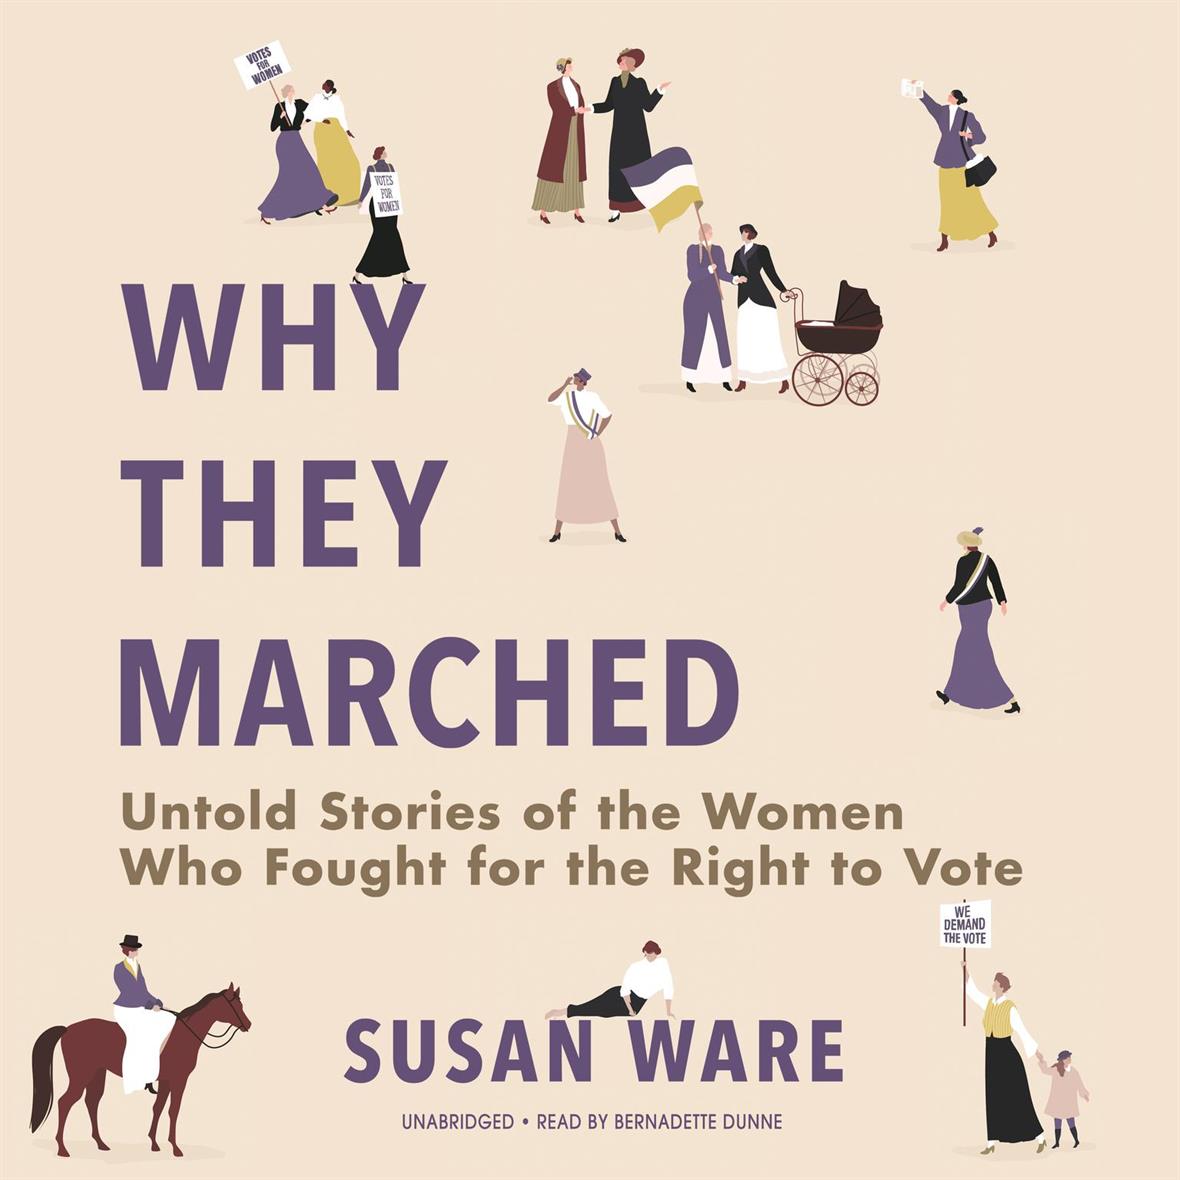 A tan background with lavender text that reads "Why the Marched: Untold Stores of the Women who Fought for the Right to Vote by Susan Ware". There are illustrations of women holding signs demanding the right to vote.